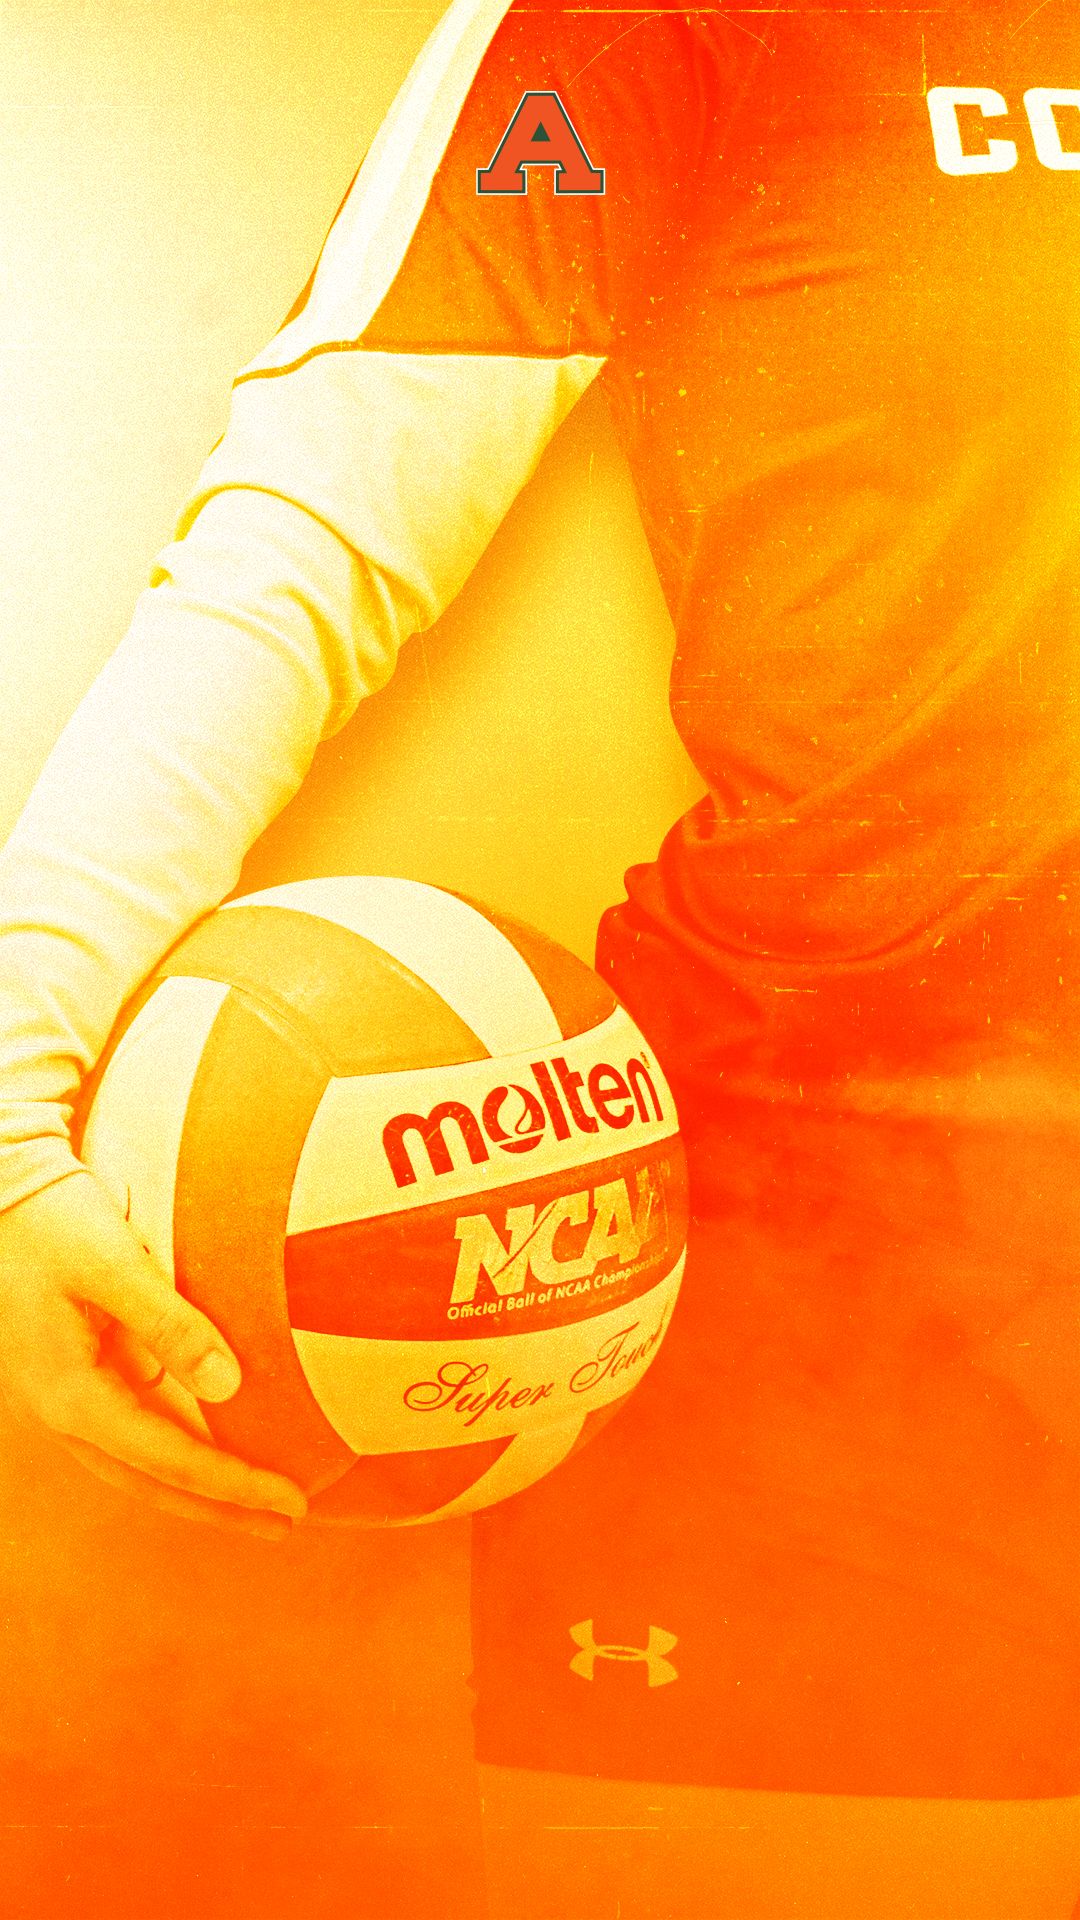 Volleyball background wallpaper 22 | Volleyball wallpaper, Volleyball  backgrounds, Volleyball pictures